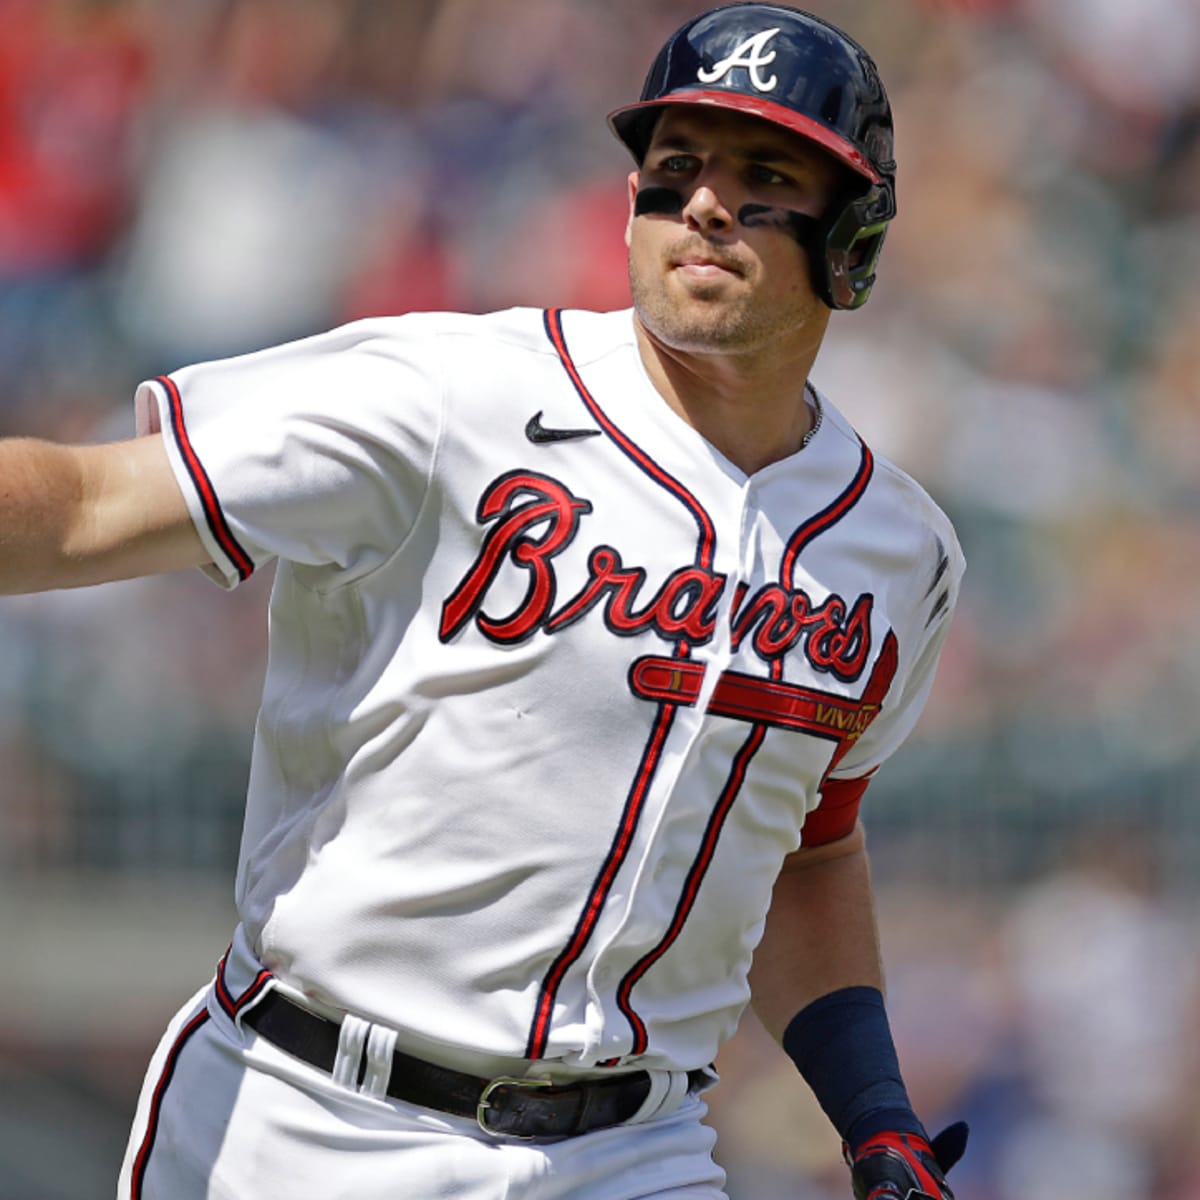 Braves: Austin Riley's contract looks even better today